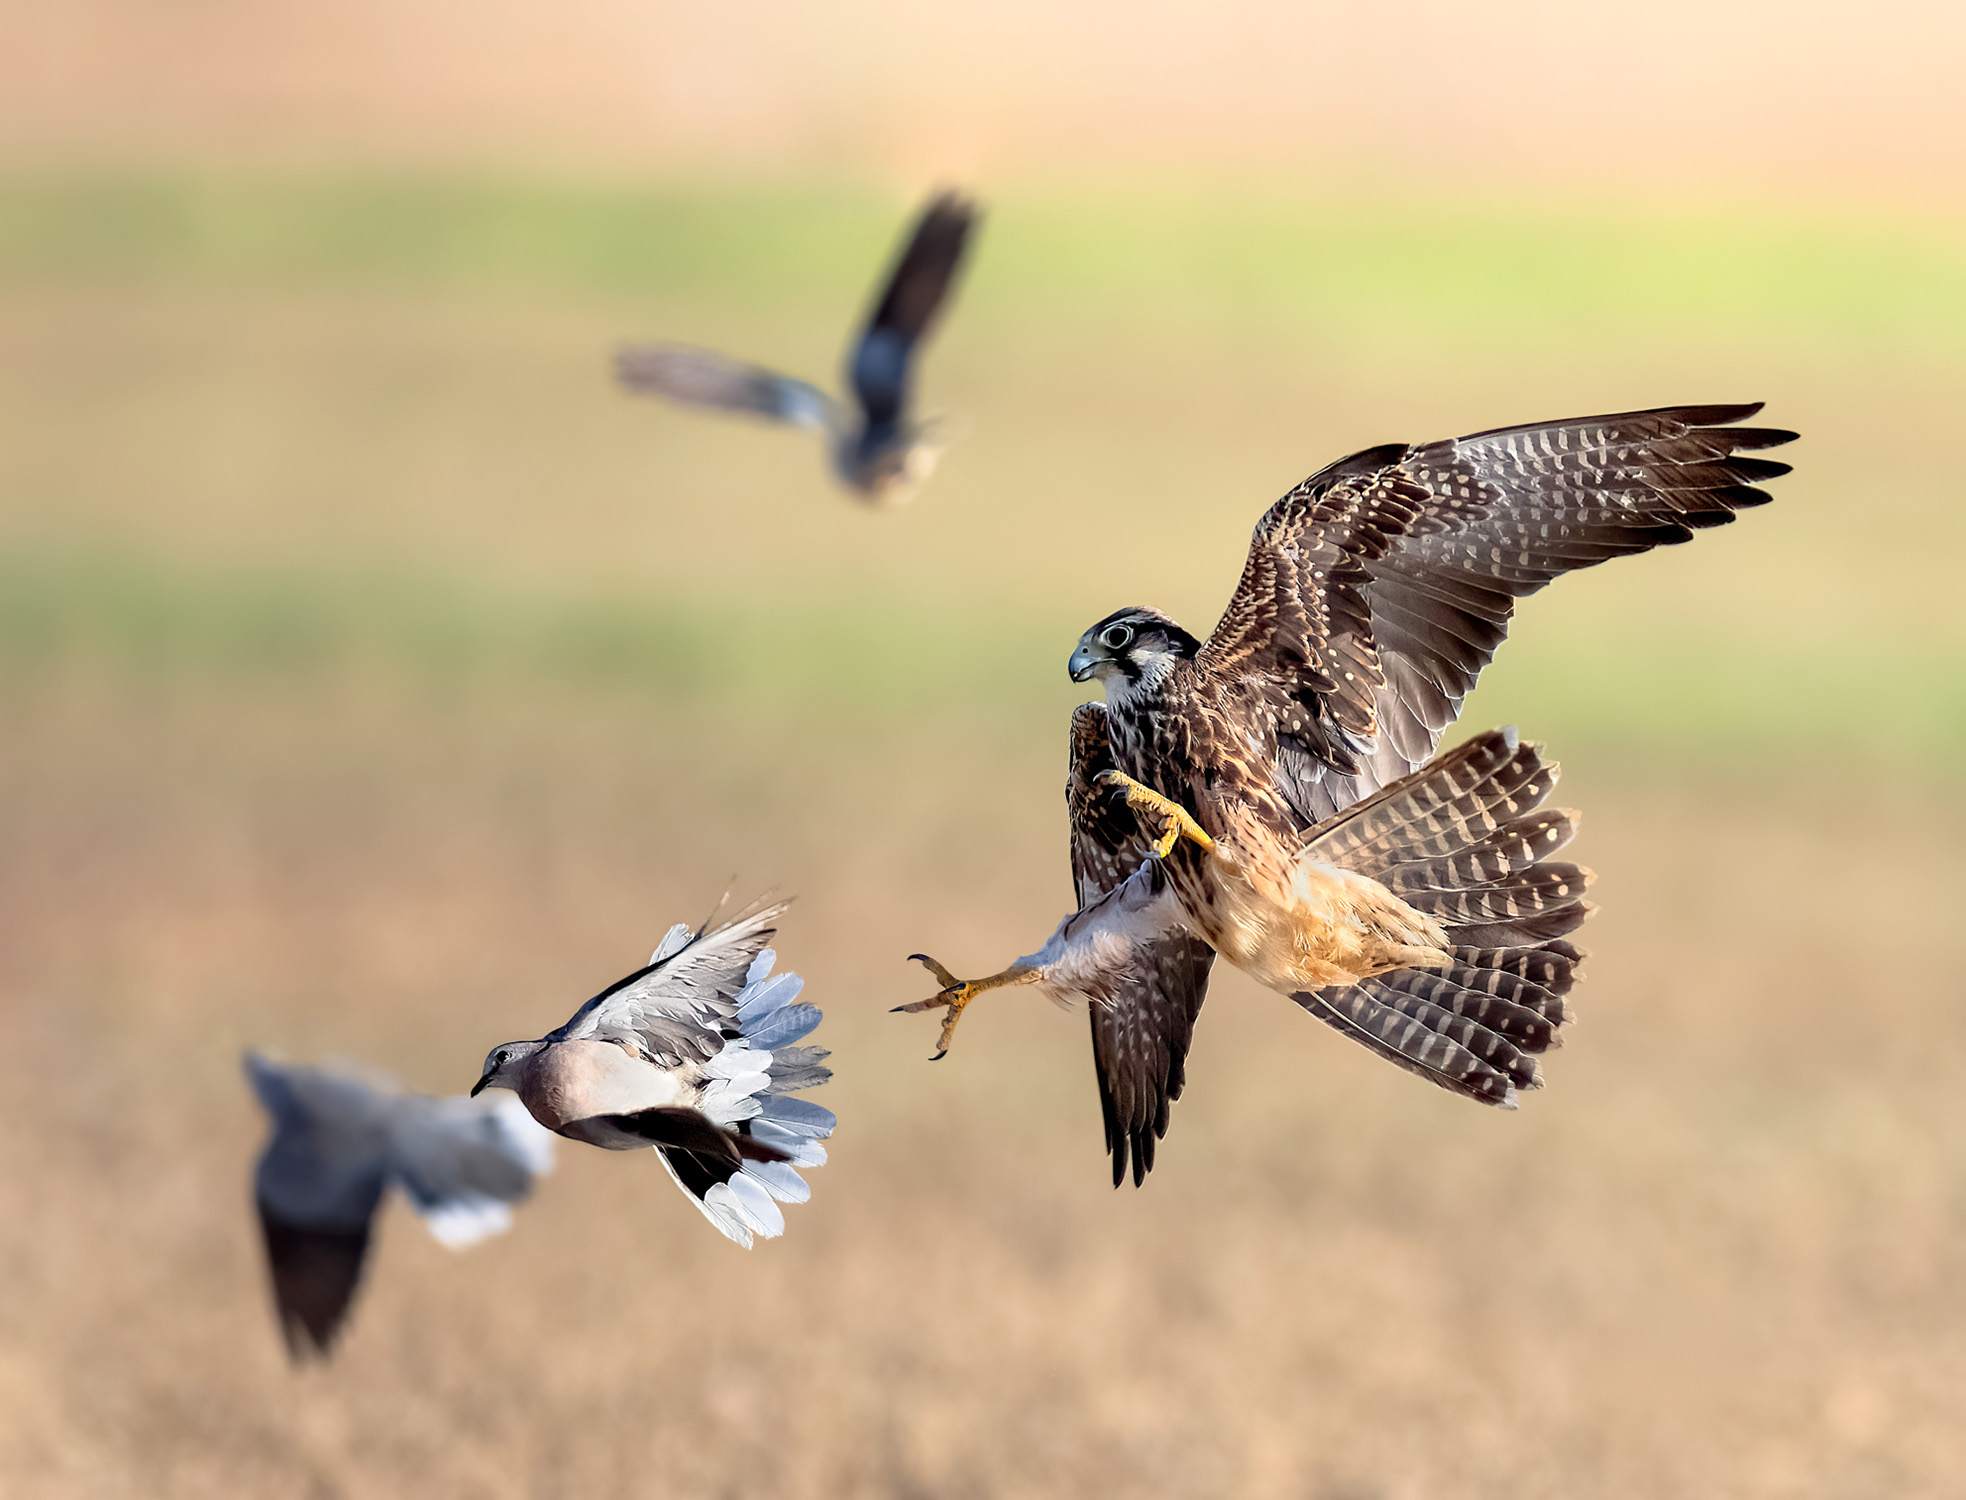 Learn how to use ISO to capture fast moving subjects like the wildlife in this photo